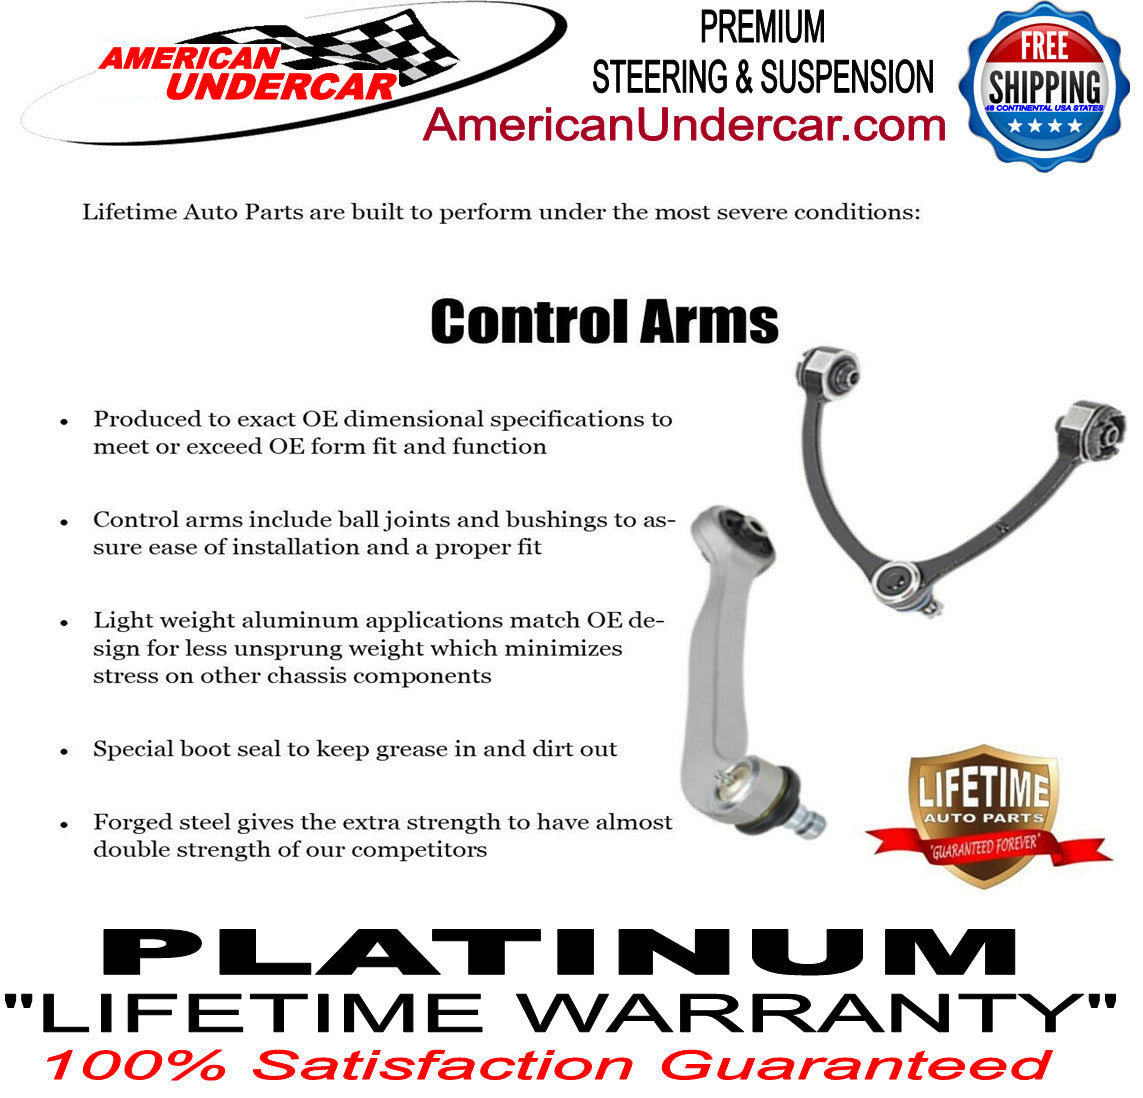 Lifetime Ball Joint Tie Rod Drag Link Steering Kit for 1995-1996 Ford F250 4x4 3850lb Axle